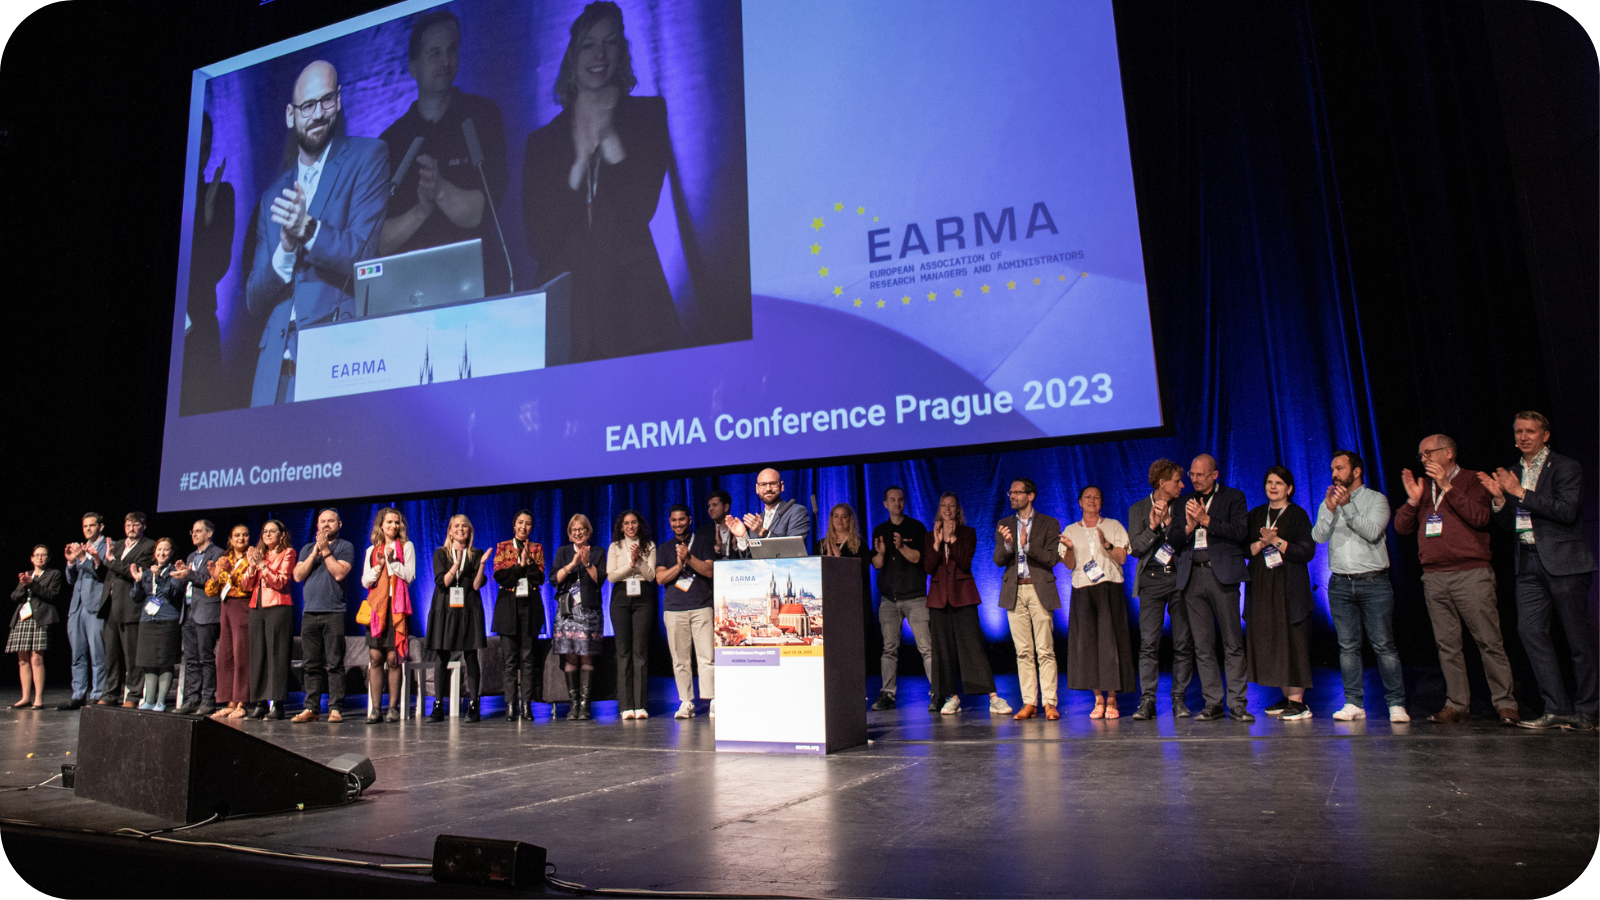 EARMA Conference takes place in Prague